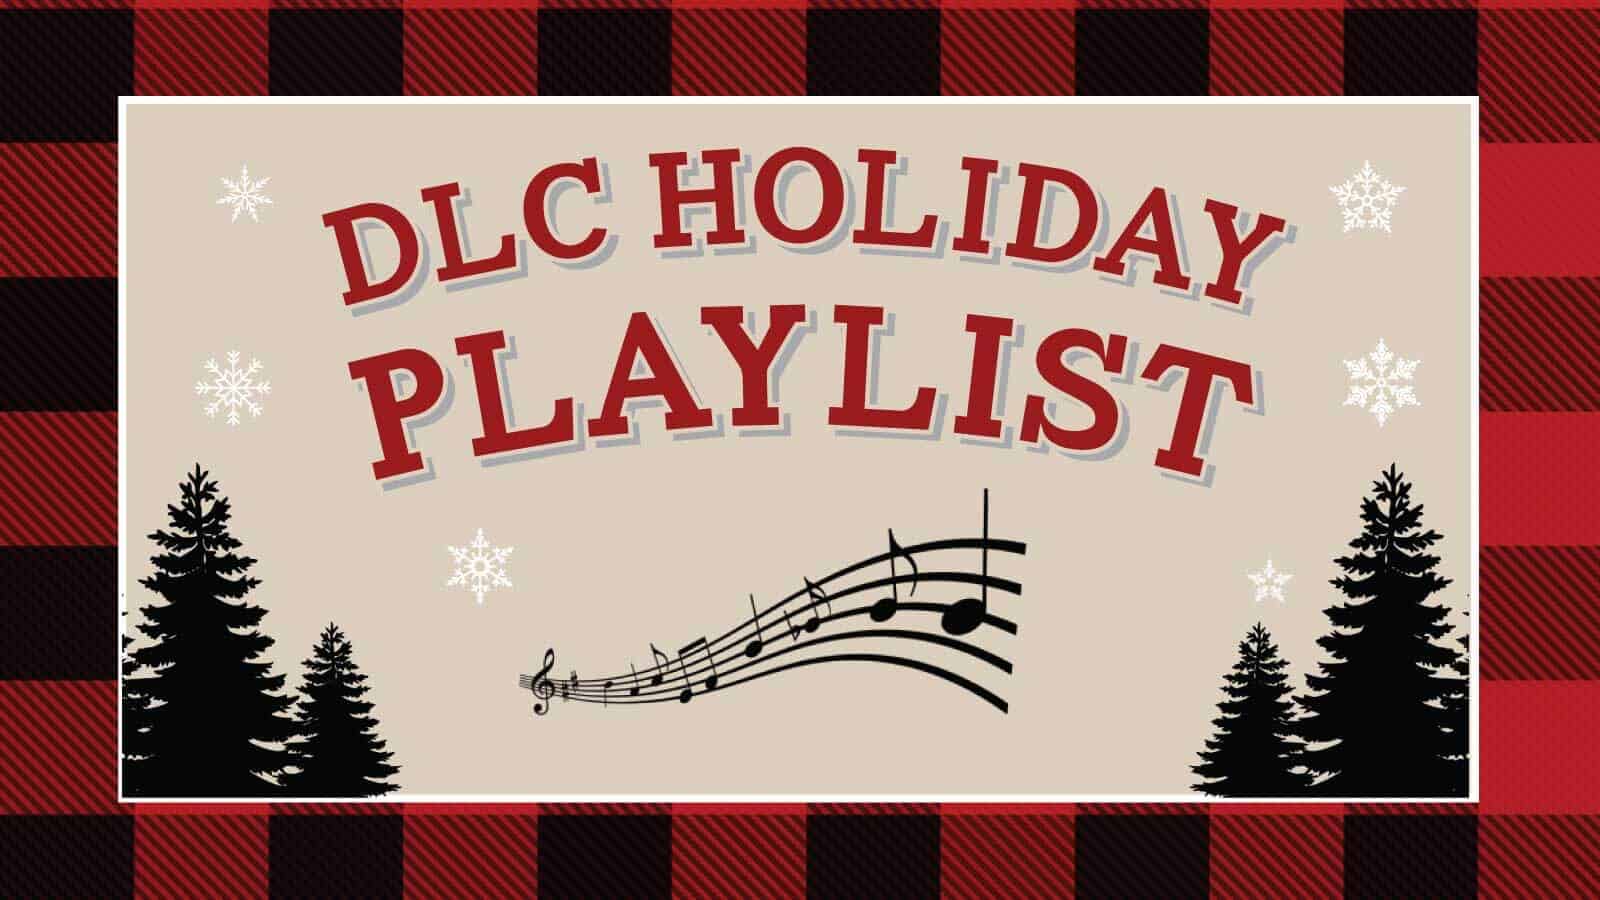 DLC Holiday Playlist graphic with trees and snowflakes on a plaid background